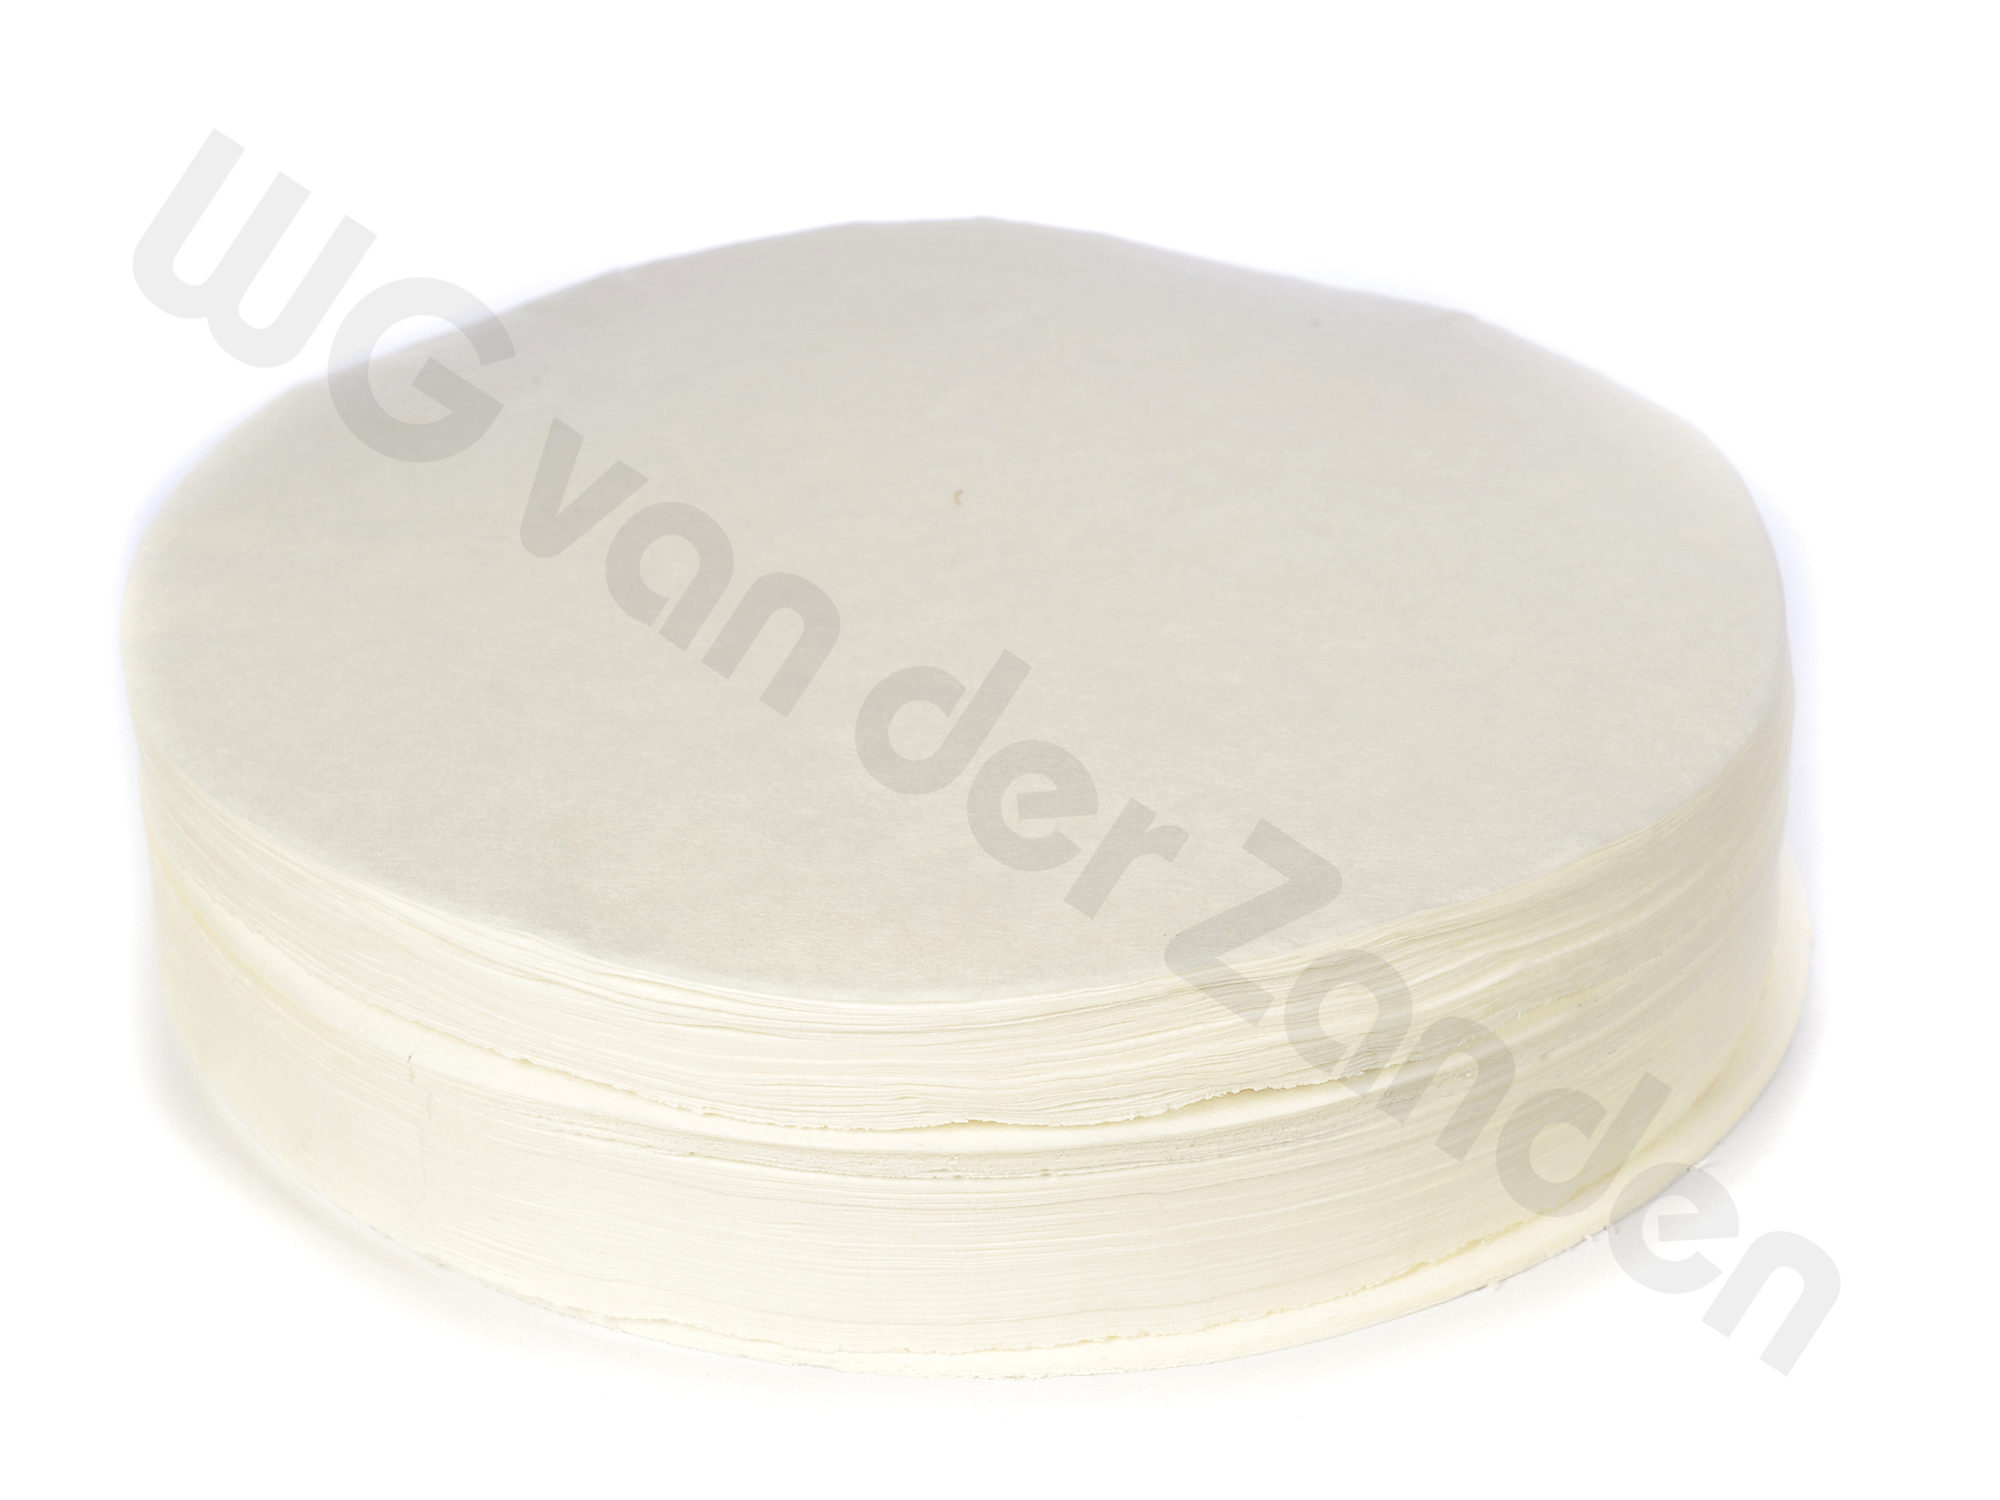 669792 KOFFIEFILTERS ROND B40 400MMØ